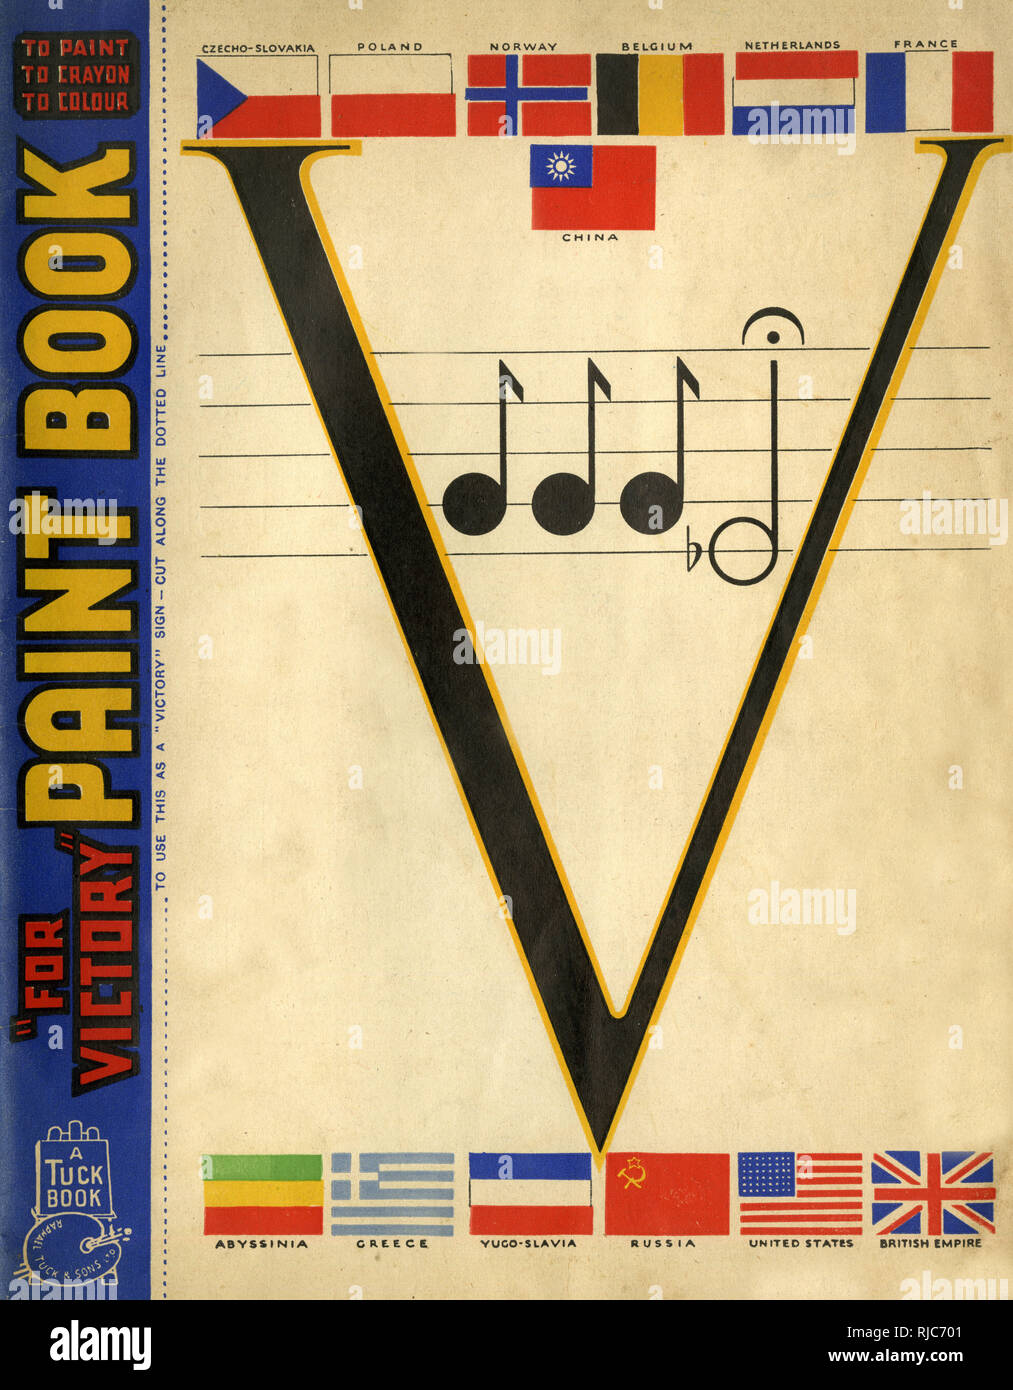 Front cover design, For Victory Paint Book, with Allied flags, a V sign, and the first four notes of Beethoven's Fifth Symphony, used as a propaganda symbol for Victory during the Second World War. Stock Photo